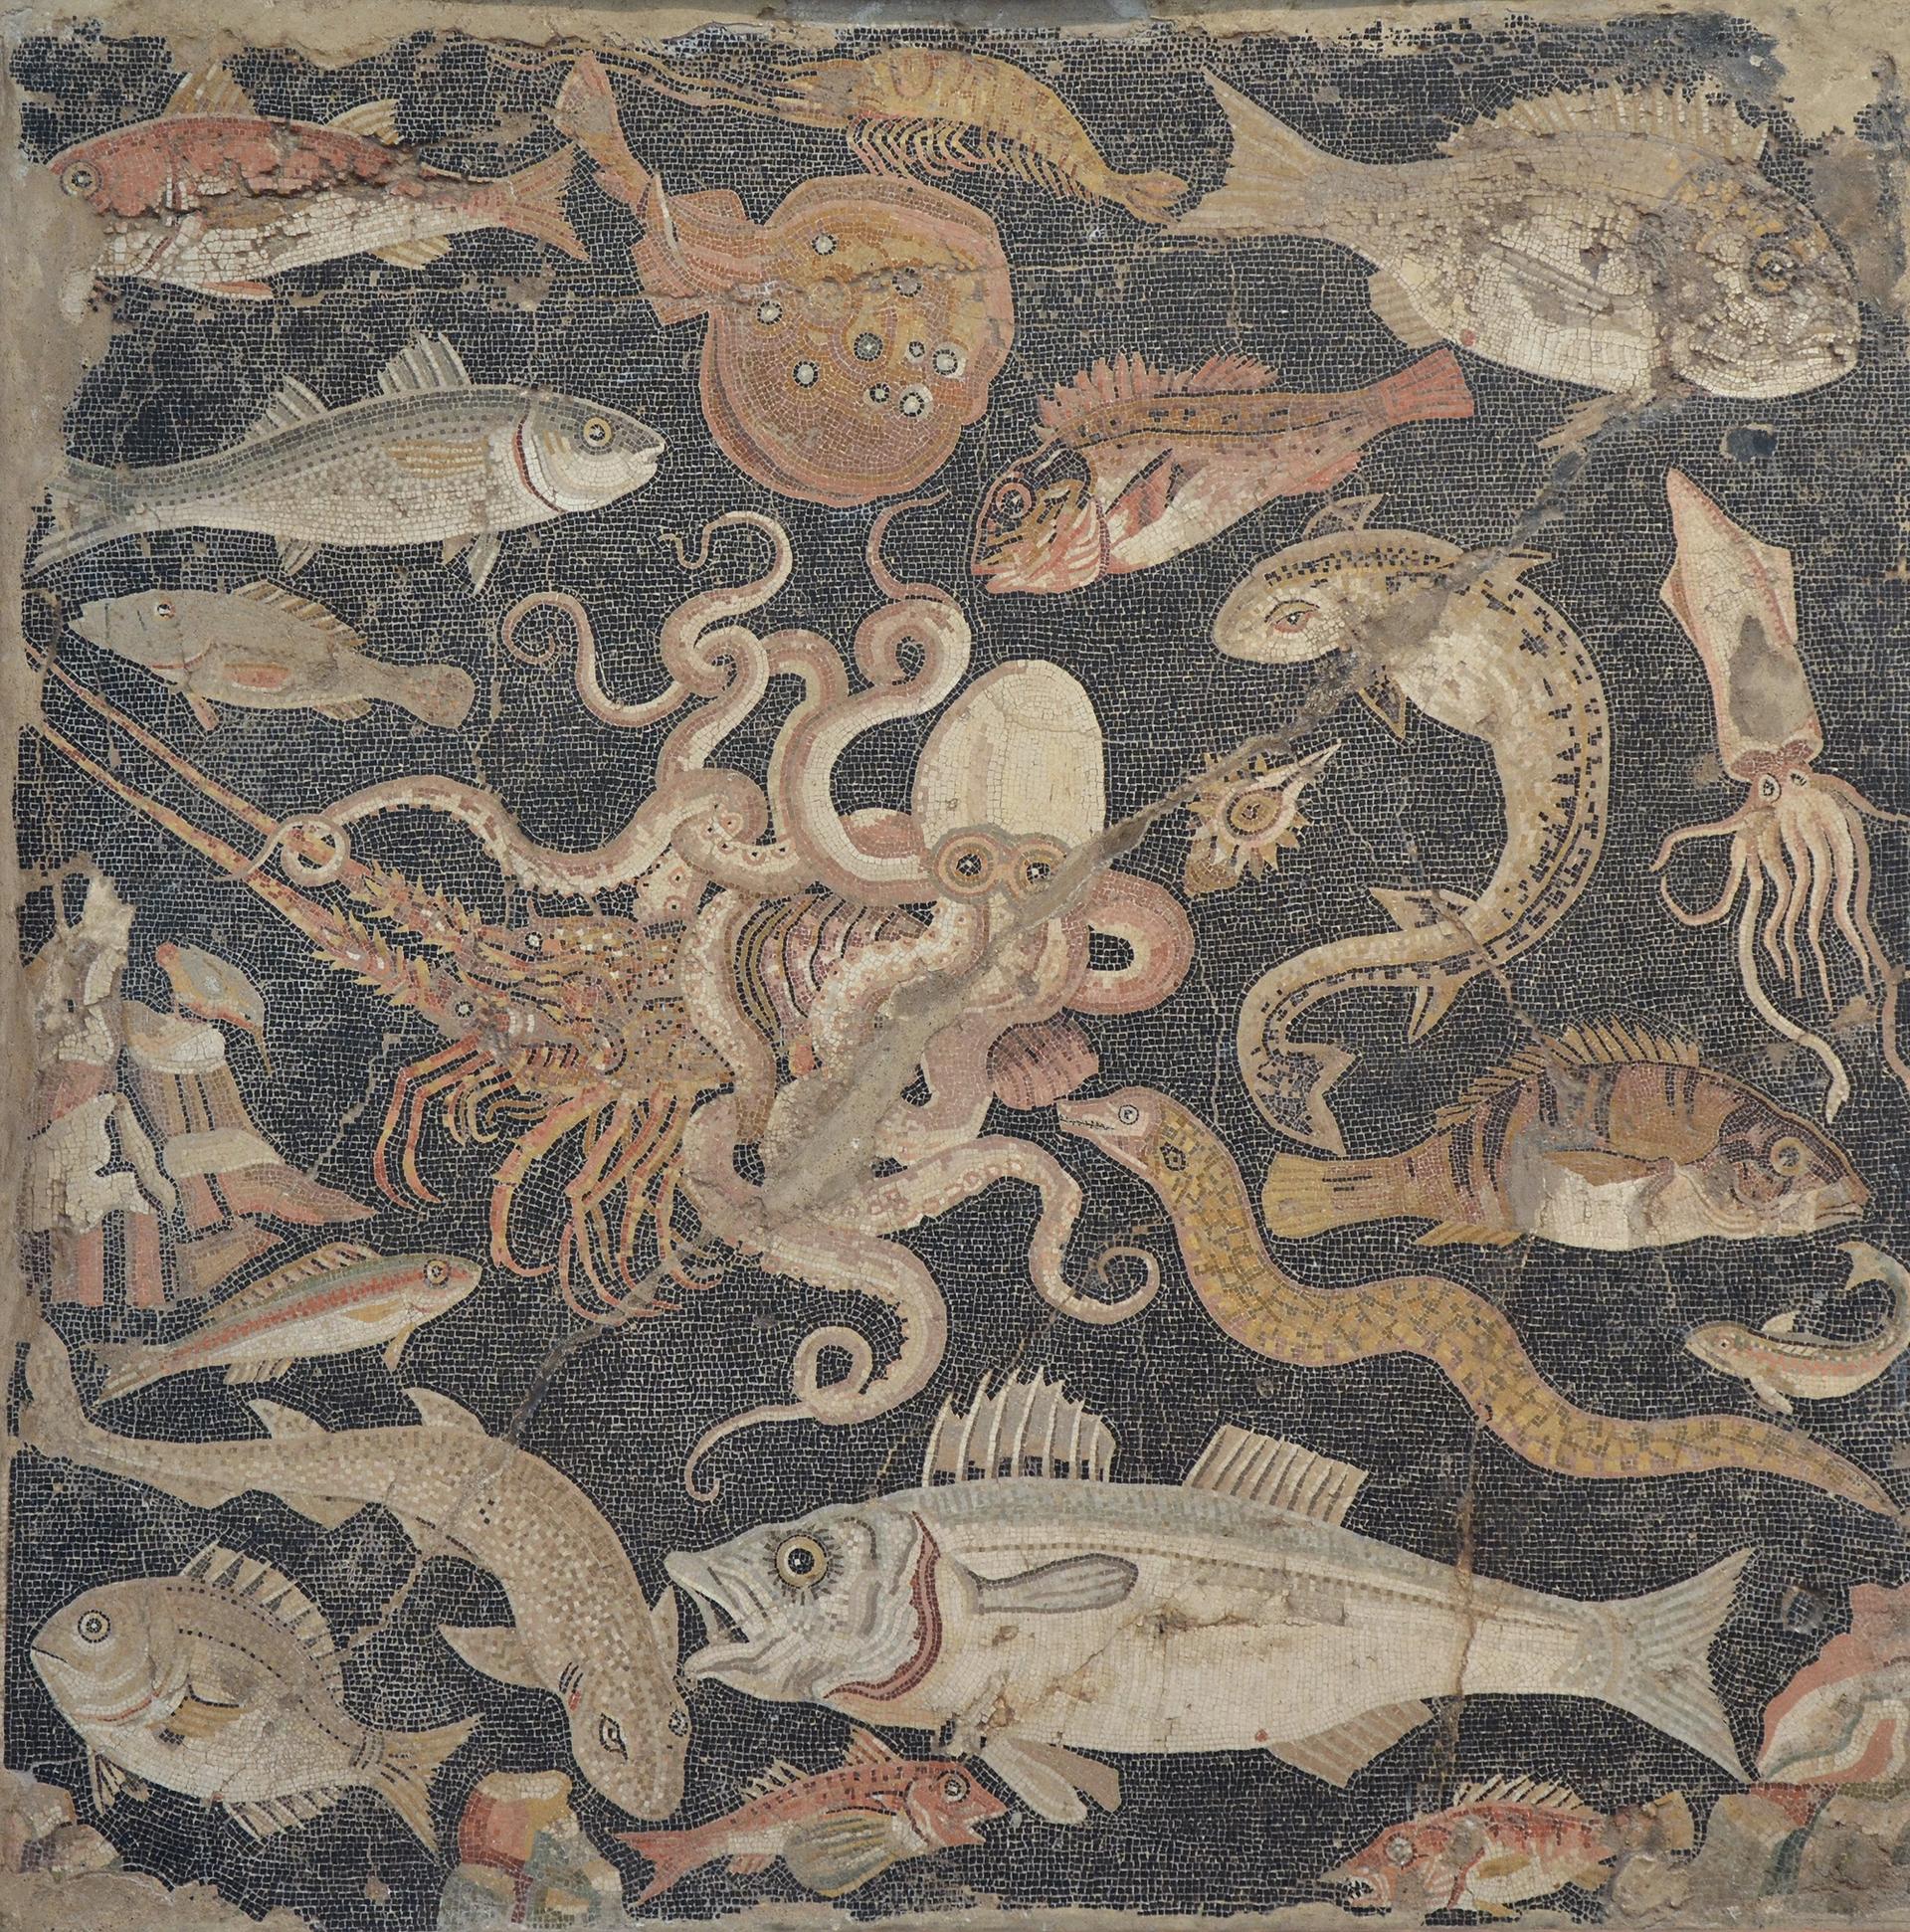 Polychrome mosaic panel with a marine scene, Roman, from Pompeii, 100-1 BC, from the Museo Archeologico Nazionale di Napoli Photo: Carole Raddato (2014) / Flickr. Image courtesy of the Fine Arts Museums of San Francisco